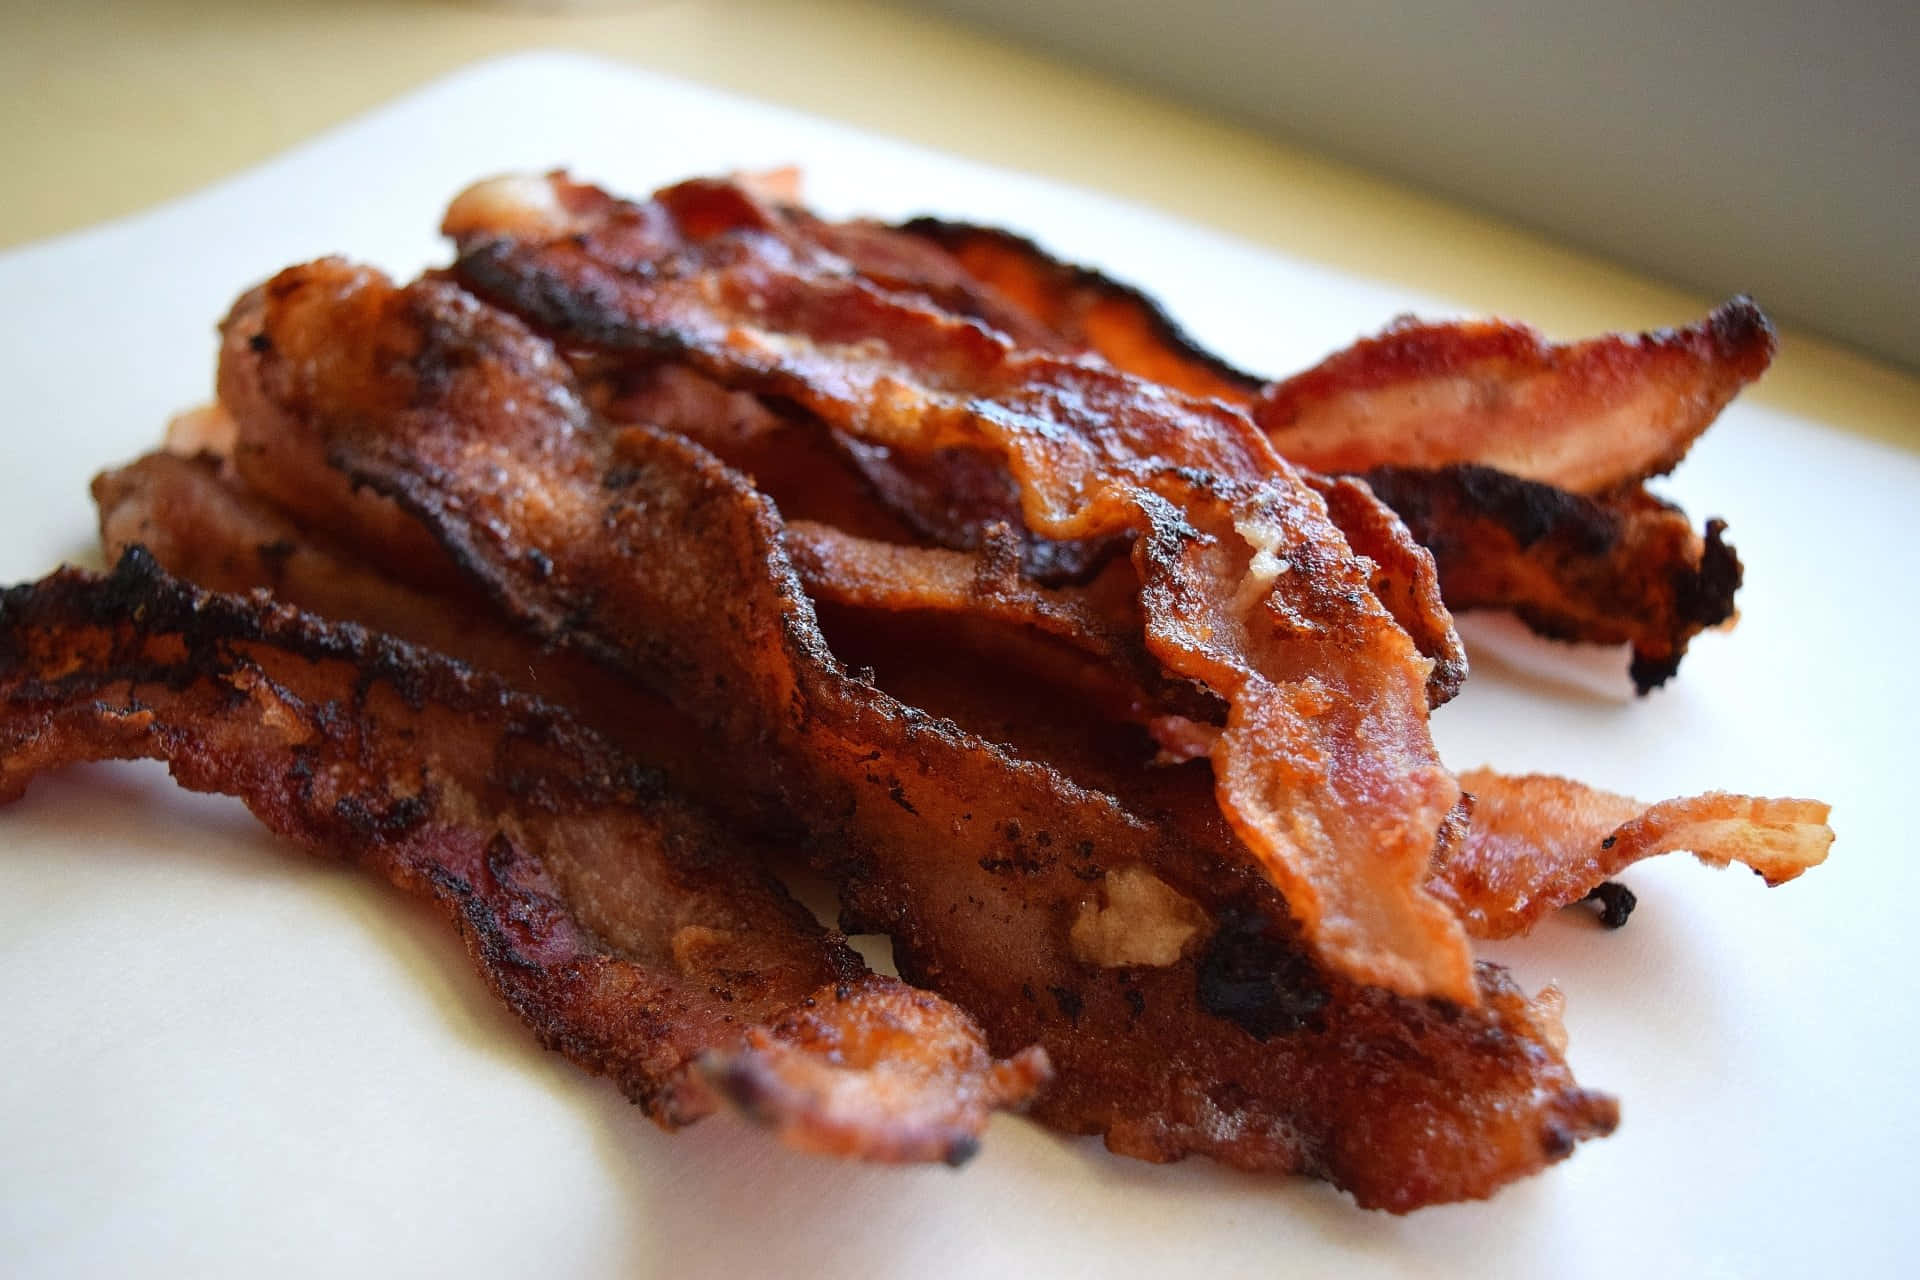 Delicious Bacon strips for your taste buds to enjoy